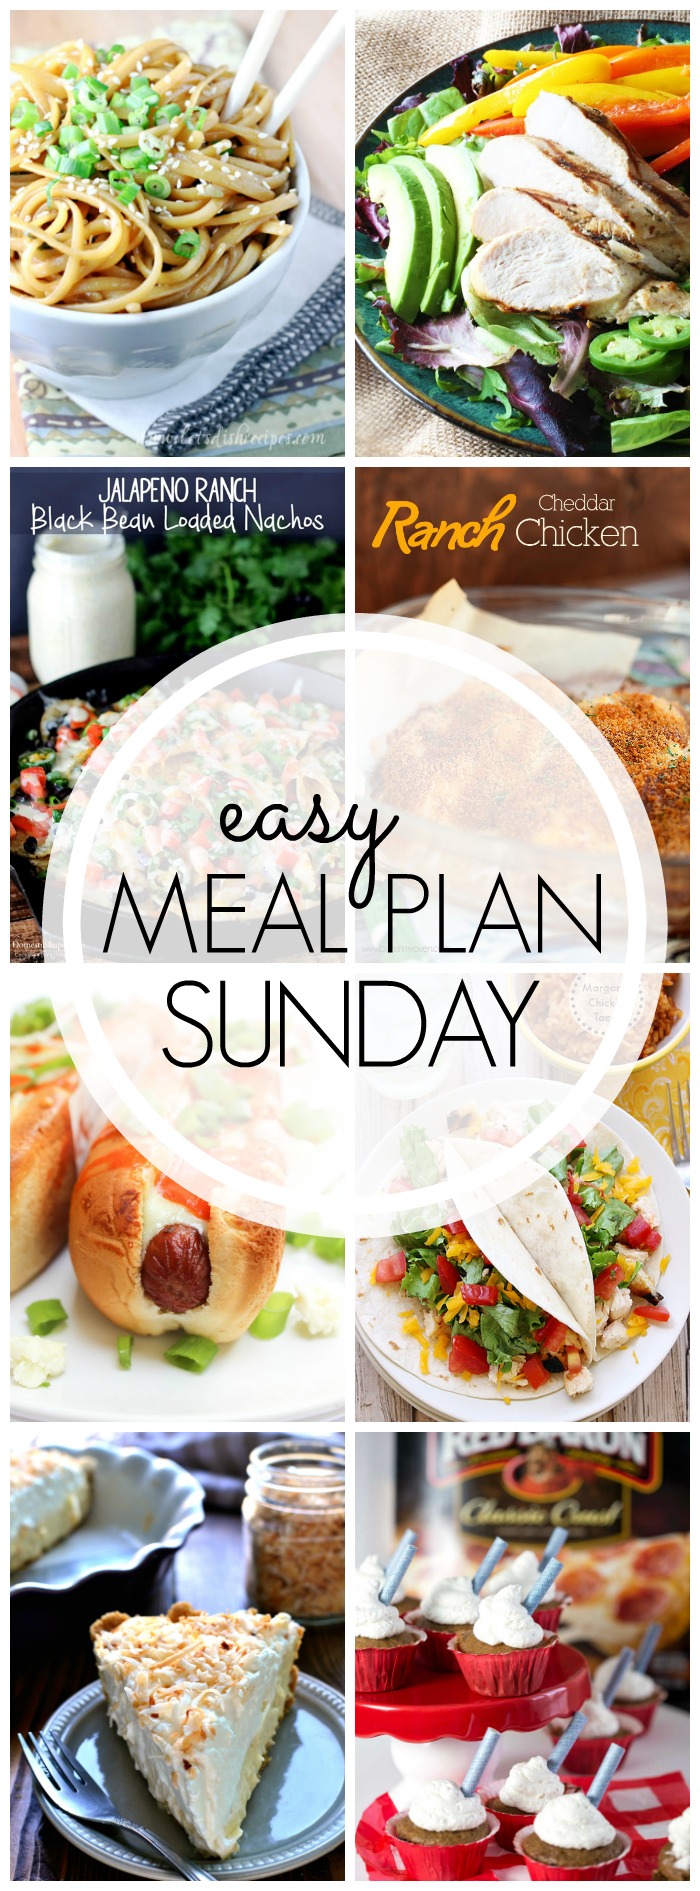 Easy Meal Plan Sunday #46